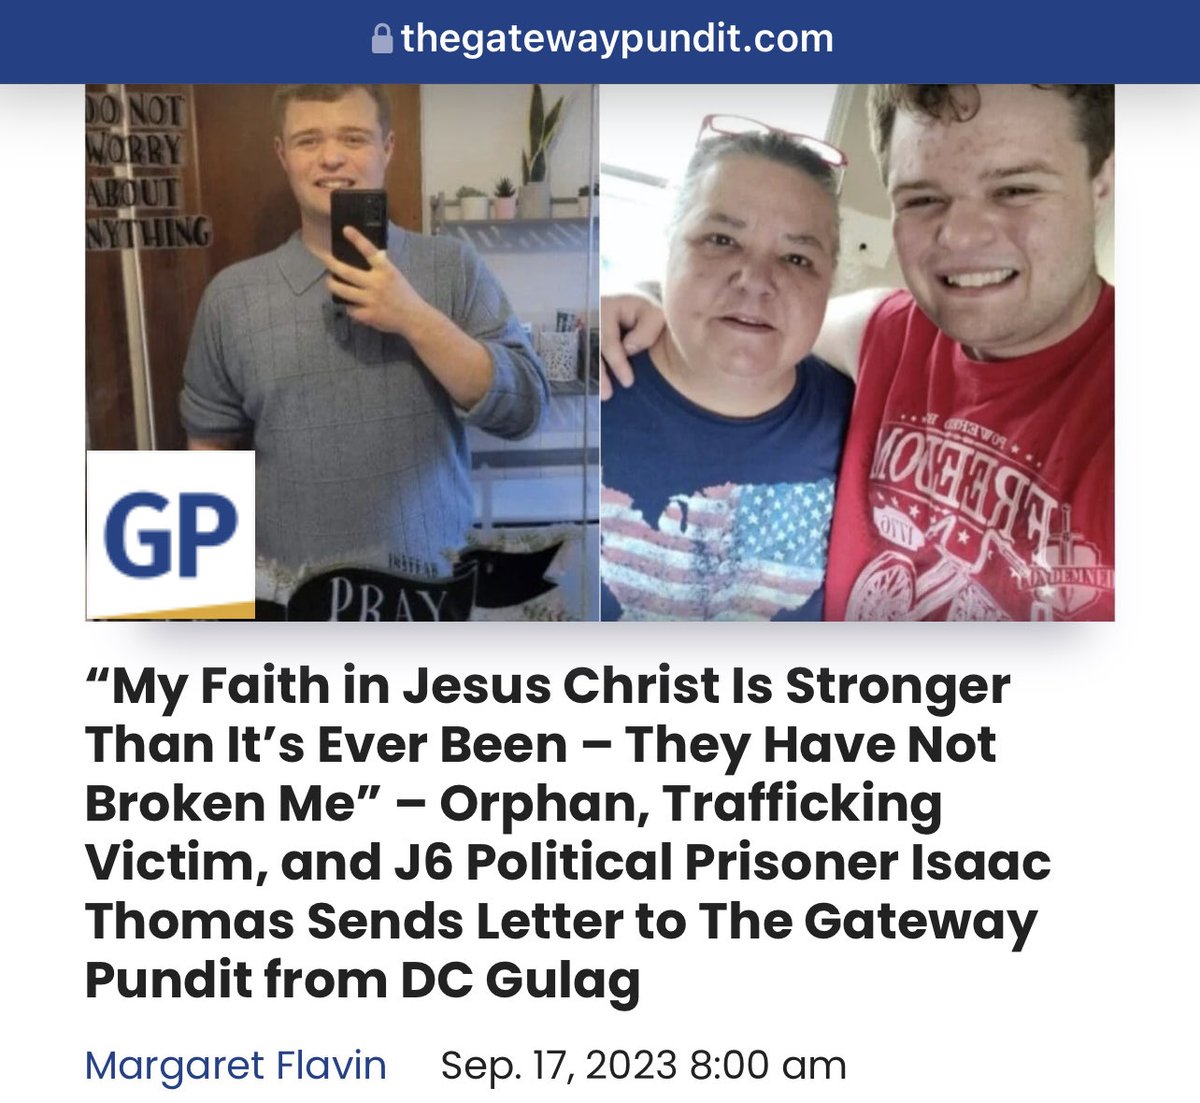 Help J6er Isaac Thomas to get closer to you while he is illegally held against his will for being politically against Satan’s Biden regime God. #DCGulag #MAGA